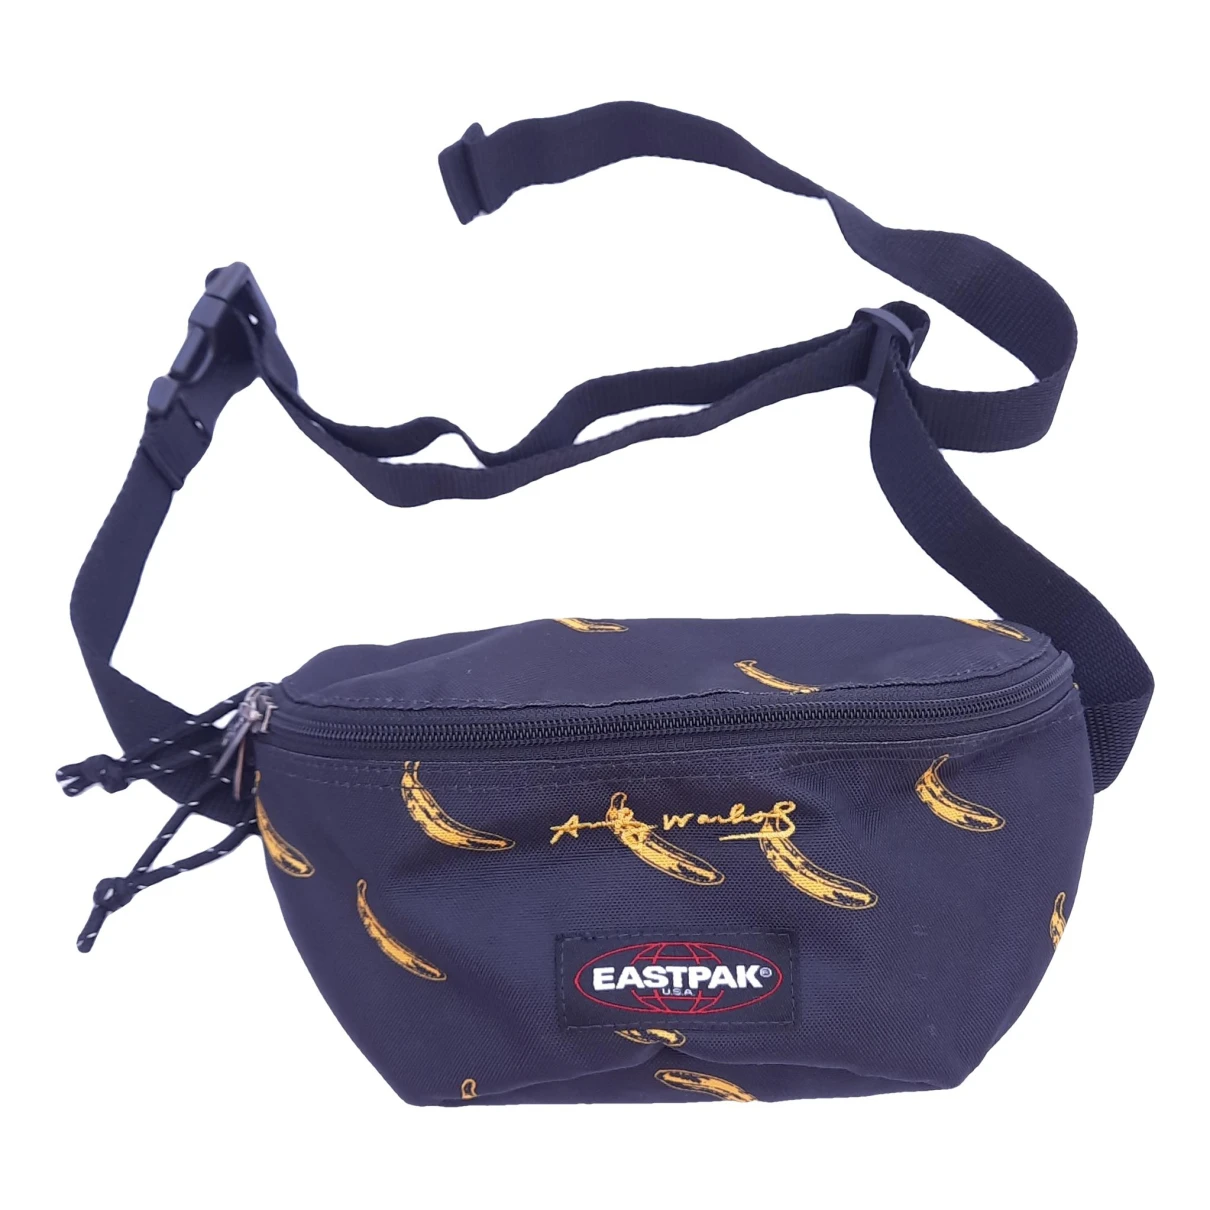 Pre-owned Eastpak Small Bag In Black